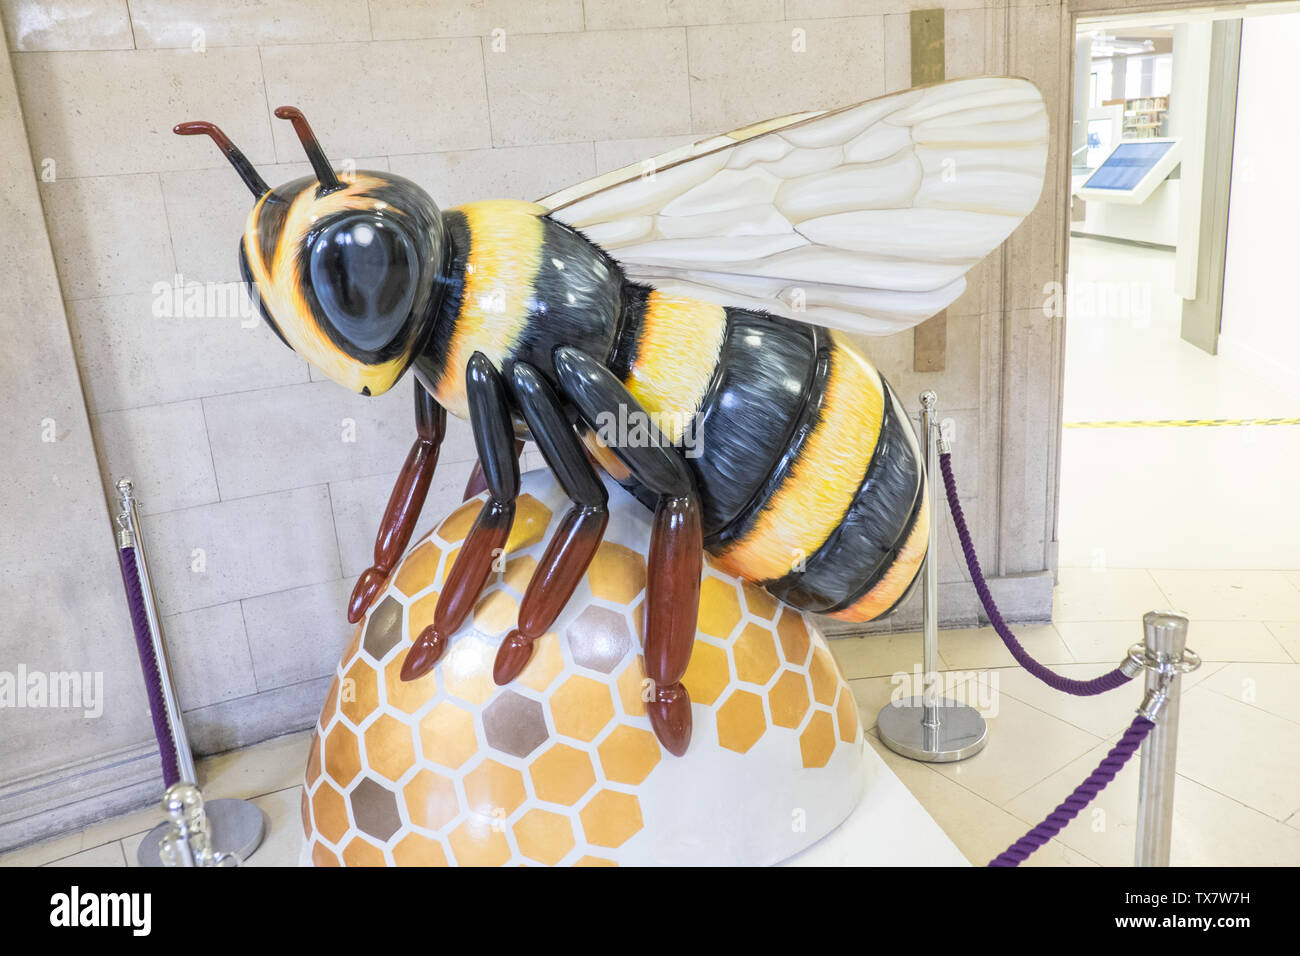 Manchester Bee,Bee,Central Library,Manchester Central Library,Manchester,north,northern,north west,city,England,English,GB,UK,Britain,British,Europe, Stock Photo